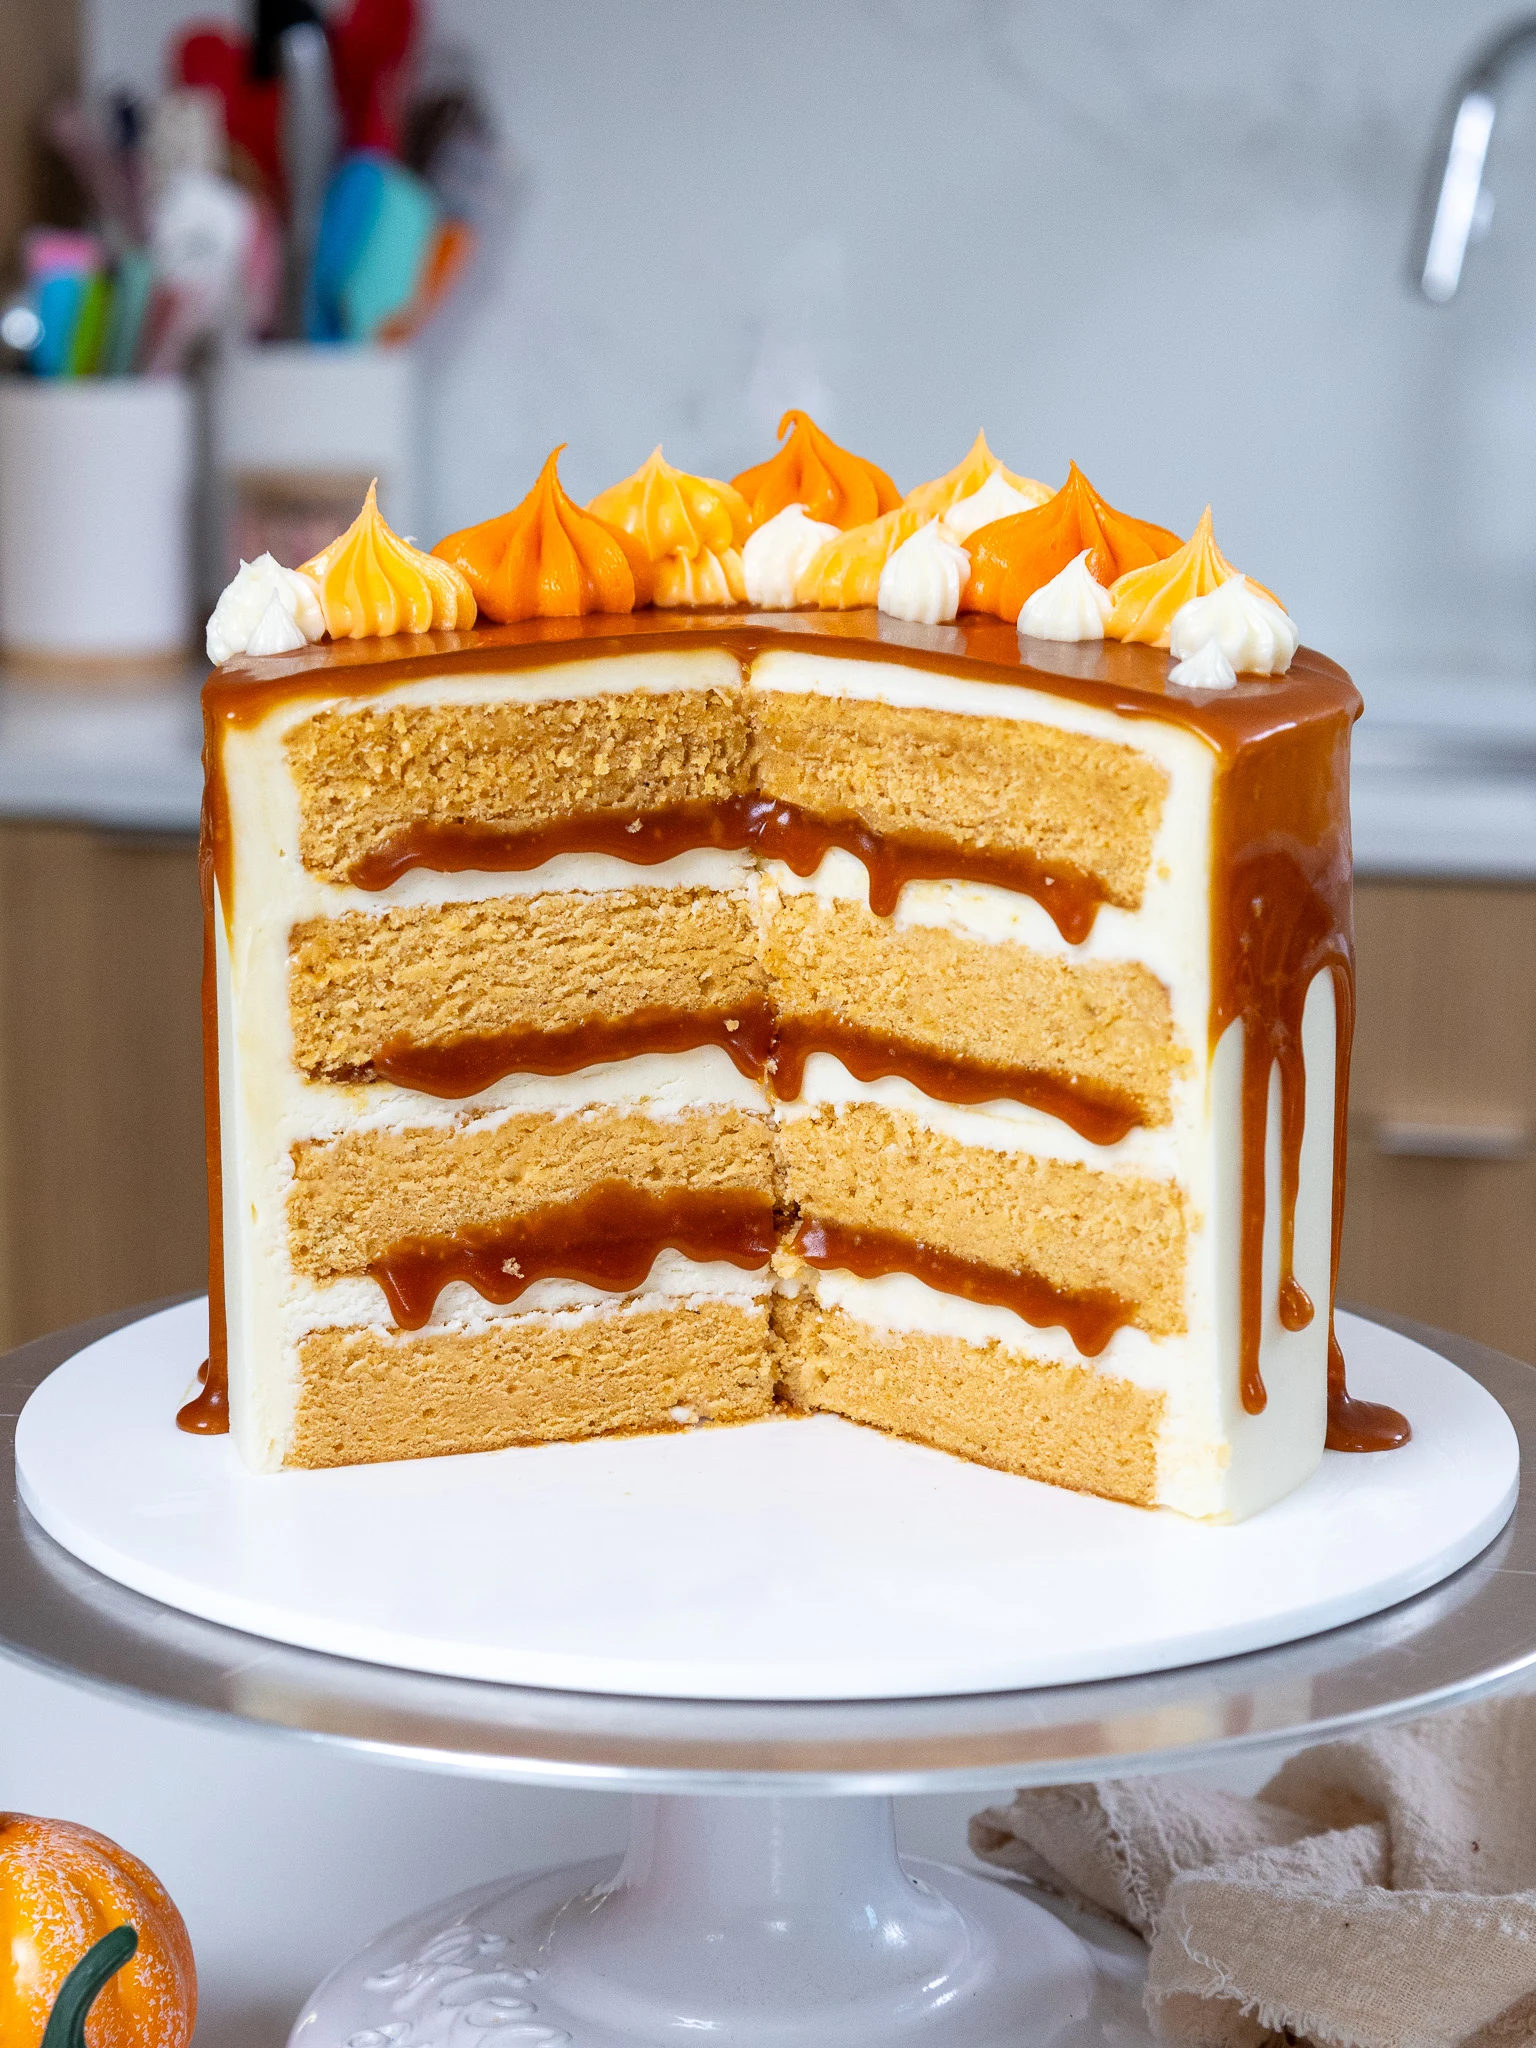 image of a pumpkin caramel layer cake that's been cut into to show its moist pumpkin can layers and caramel filling